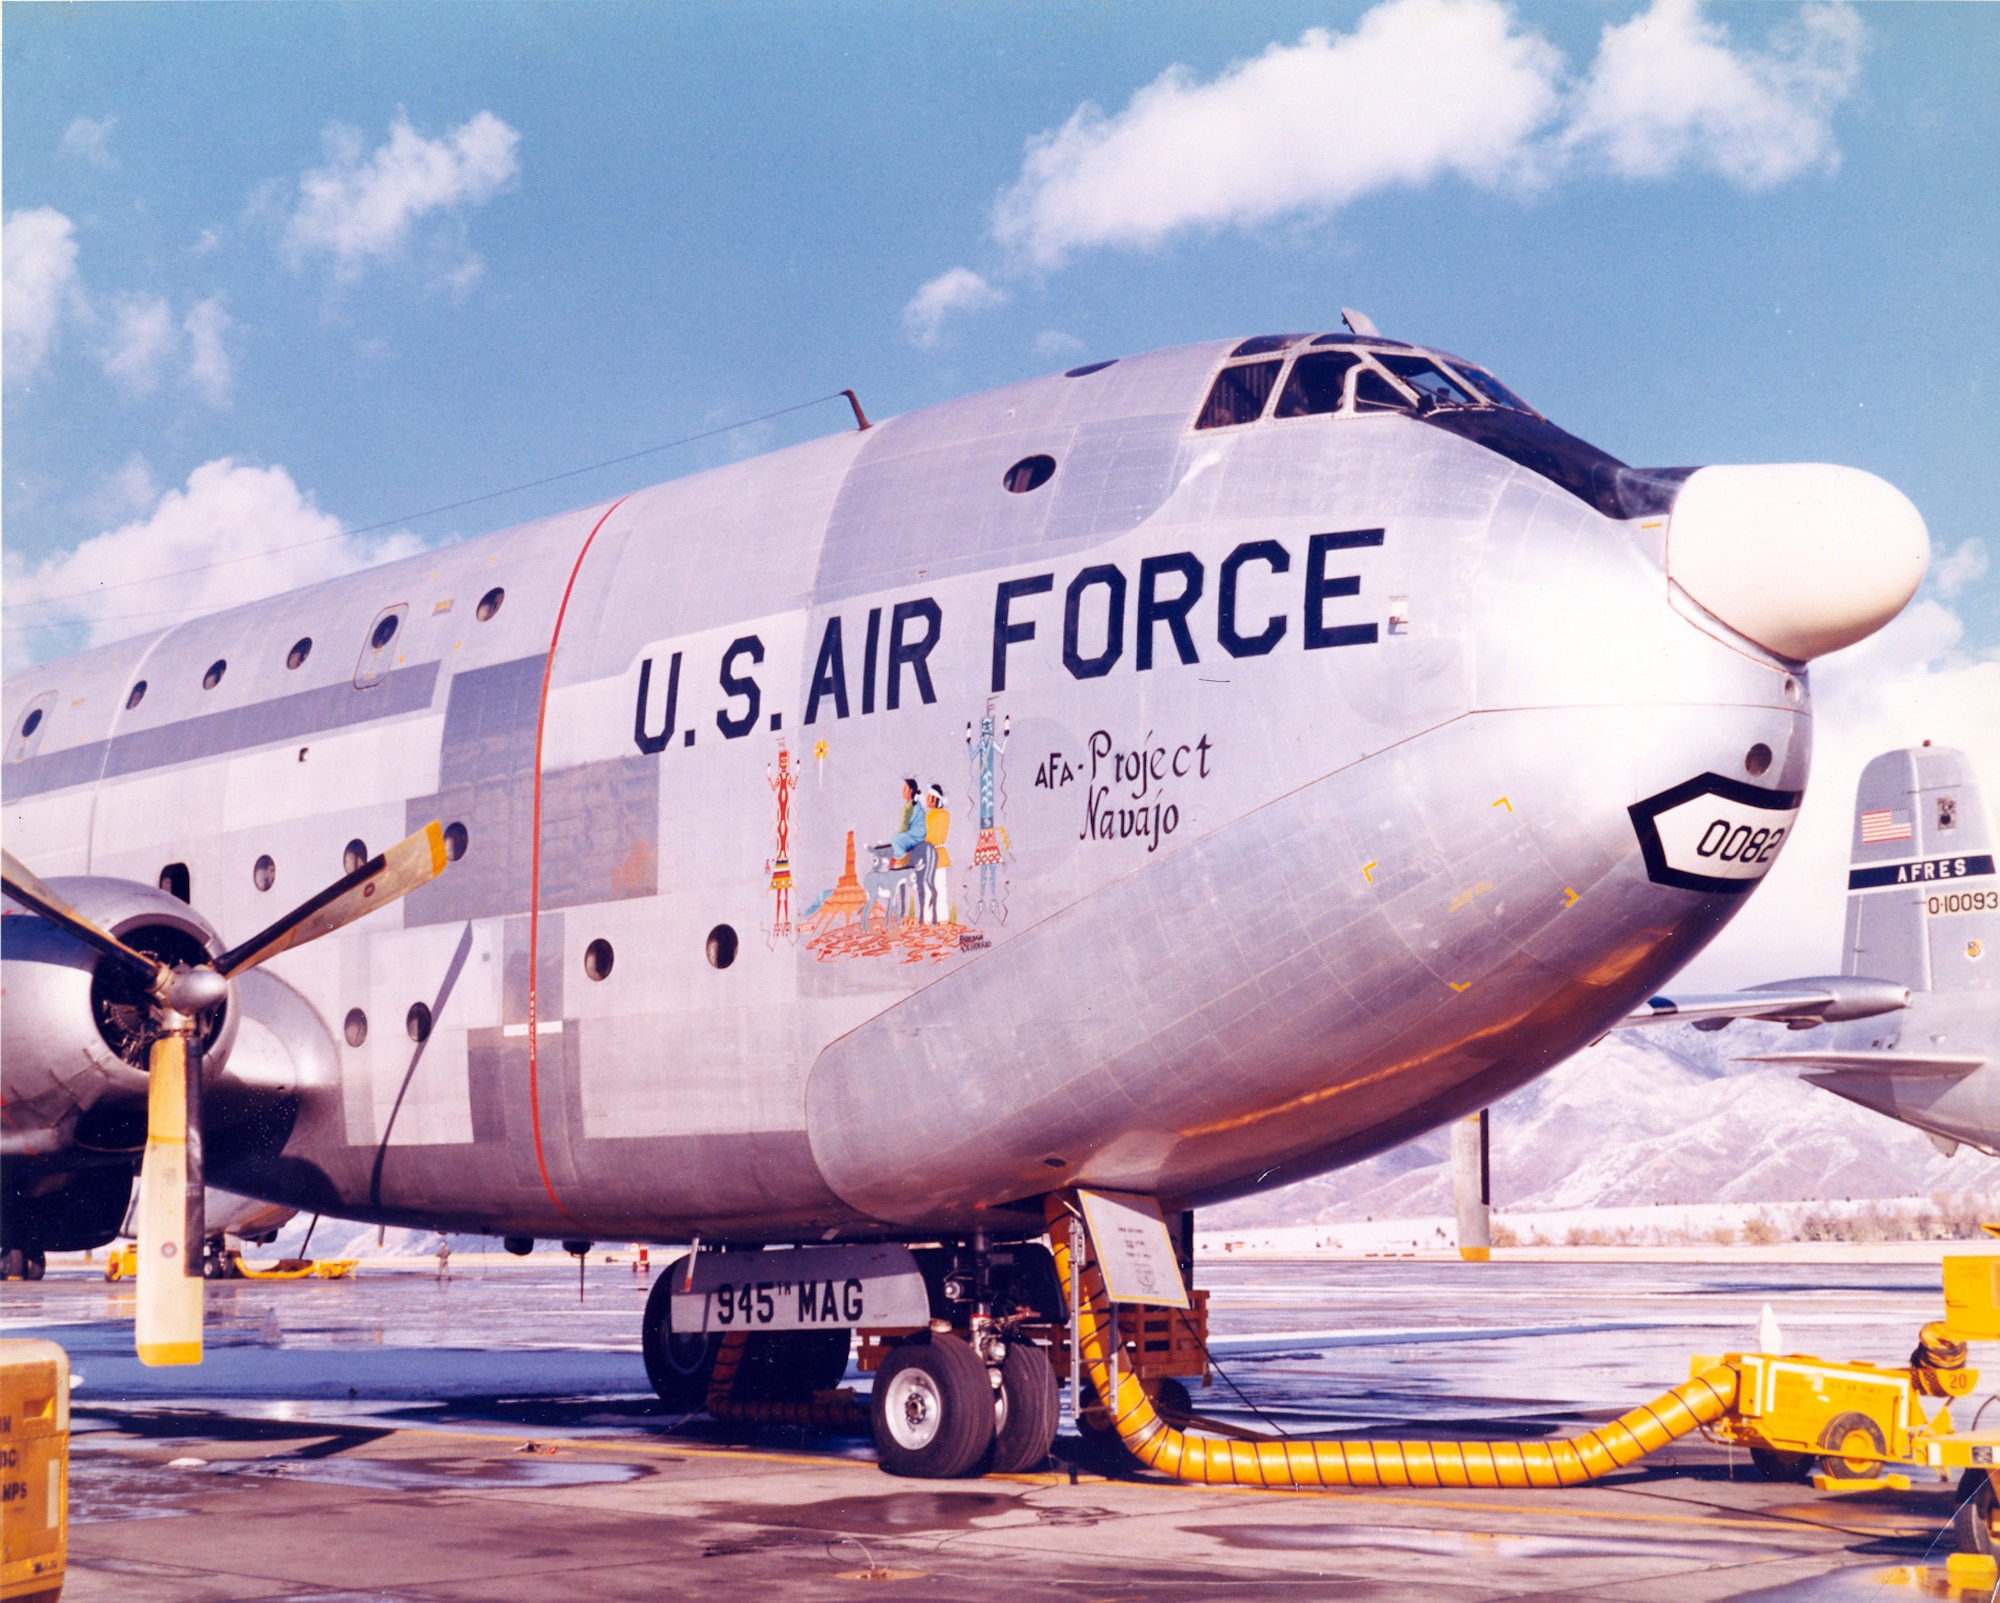 During the 1960s and 70s, Utah's Air Force Reserve unit built an enduring friendship with the Navajo. For a time, one of the unit’s C-124 aircraft sported a stylized mural of the Advent of Christ painted by Navajo students from the Intermountain Indian School in Brigham City, Utah.